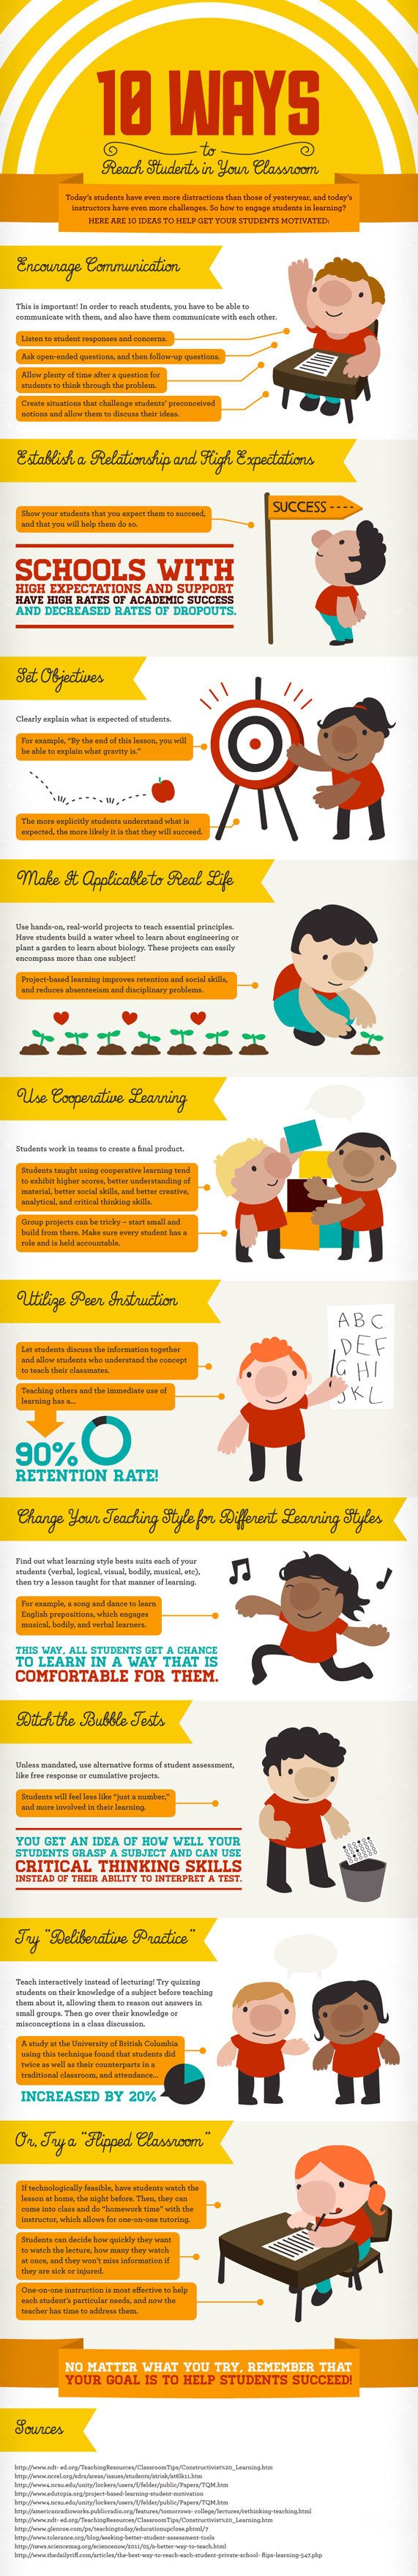 How-to-Motivate-Your-Students-in-the-Classroom-Infographic